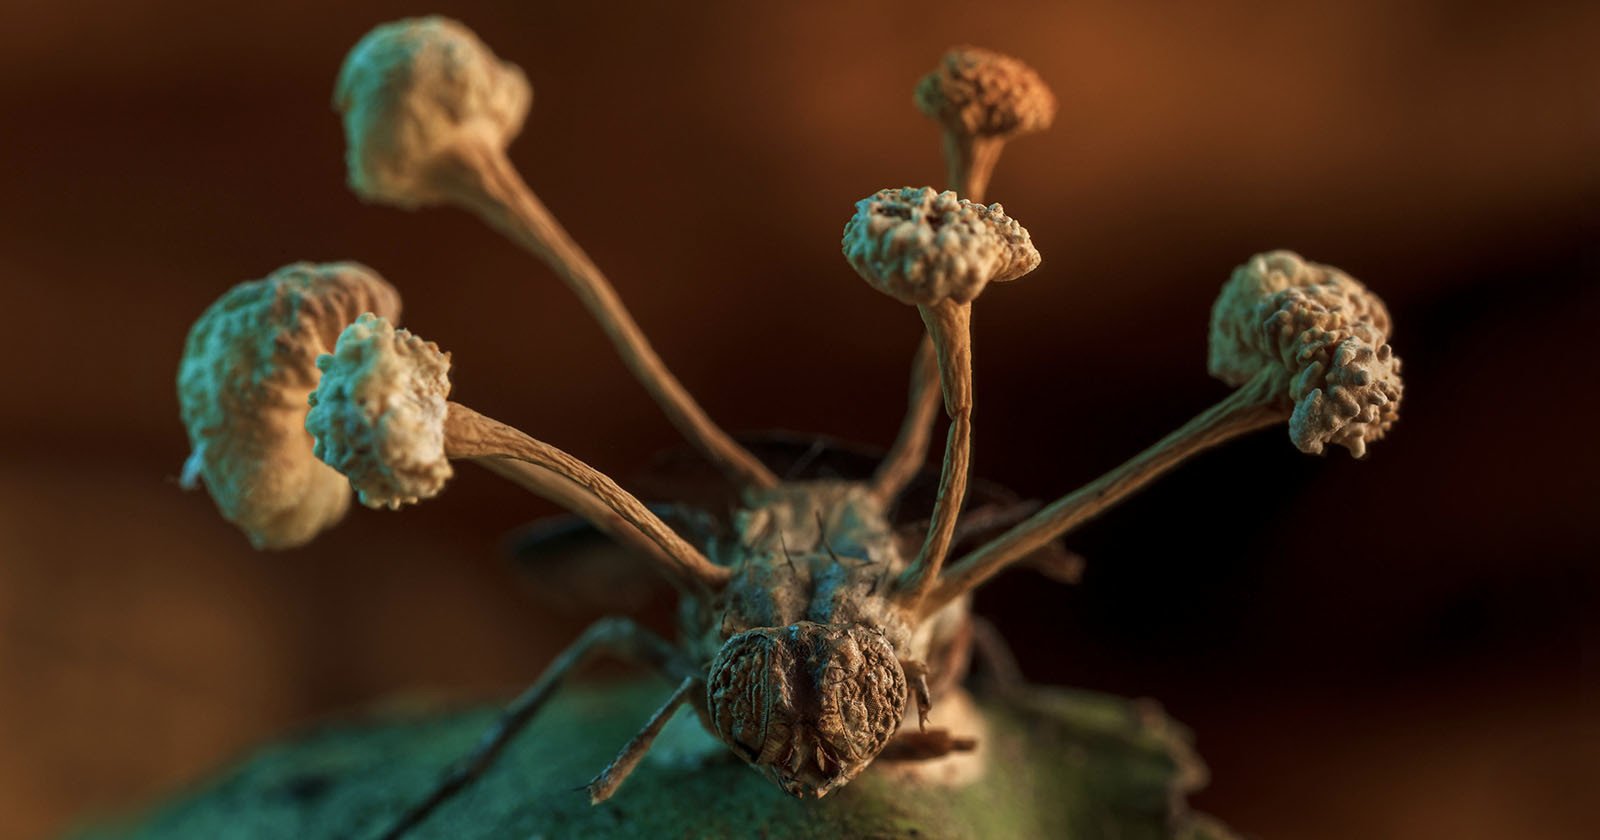  photo zombie fungus infecting insect wins ecology competition 